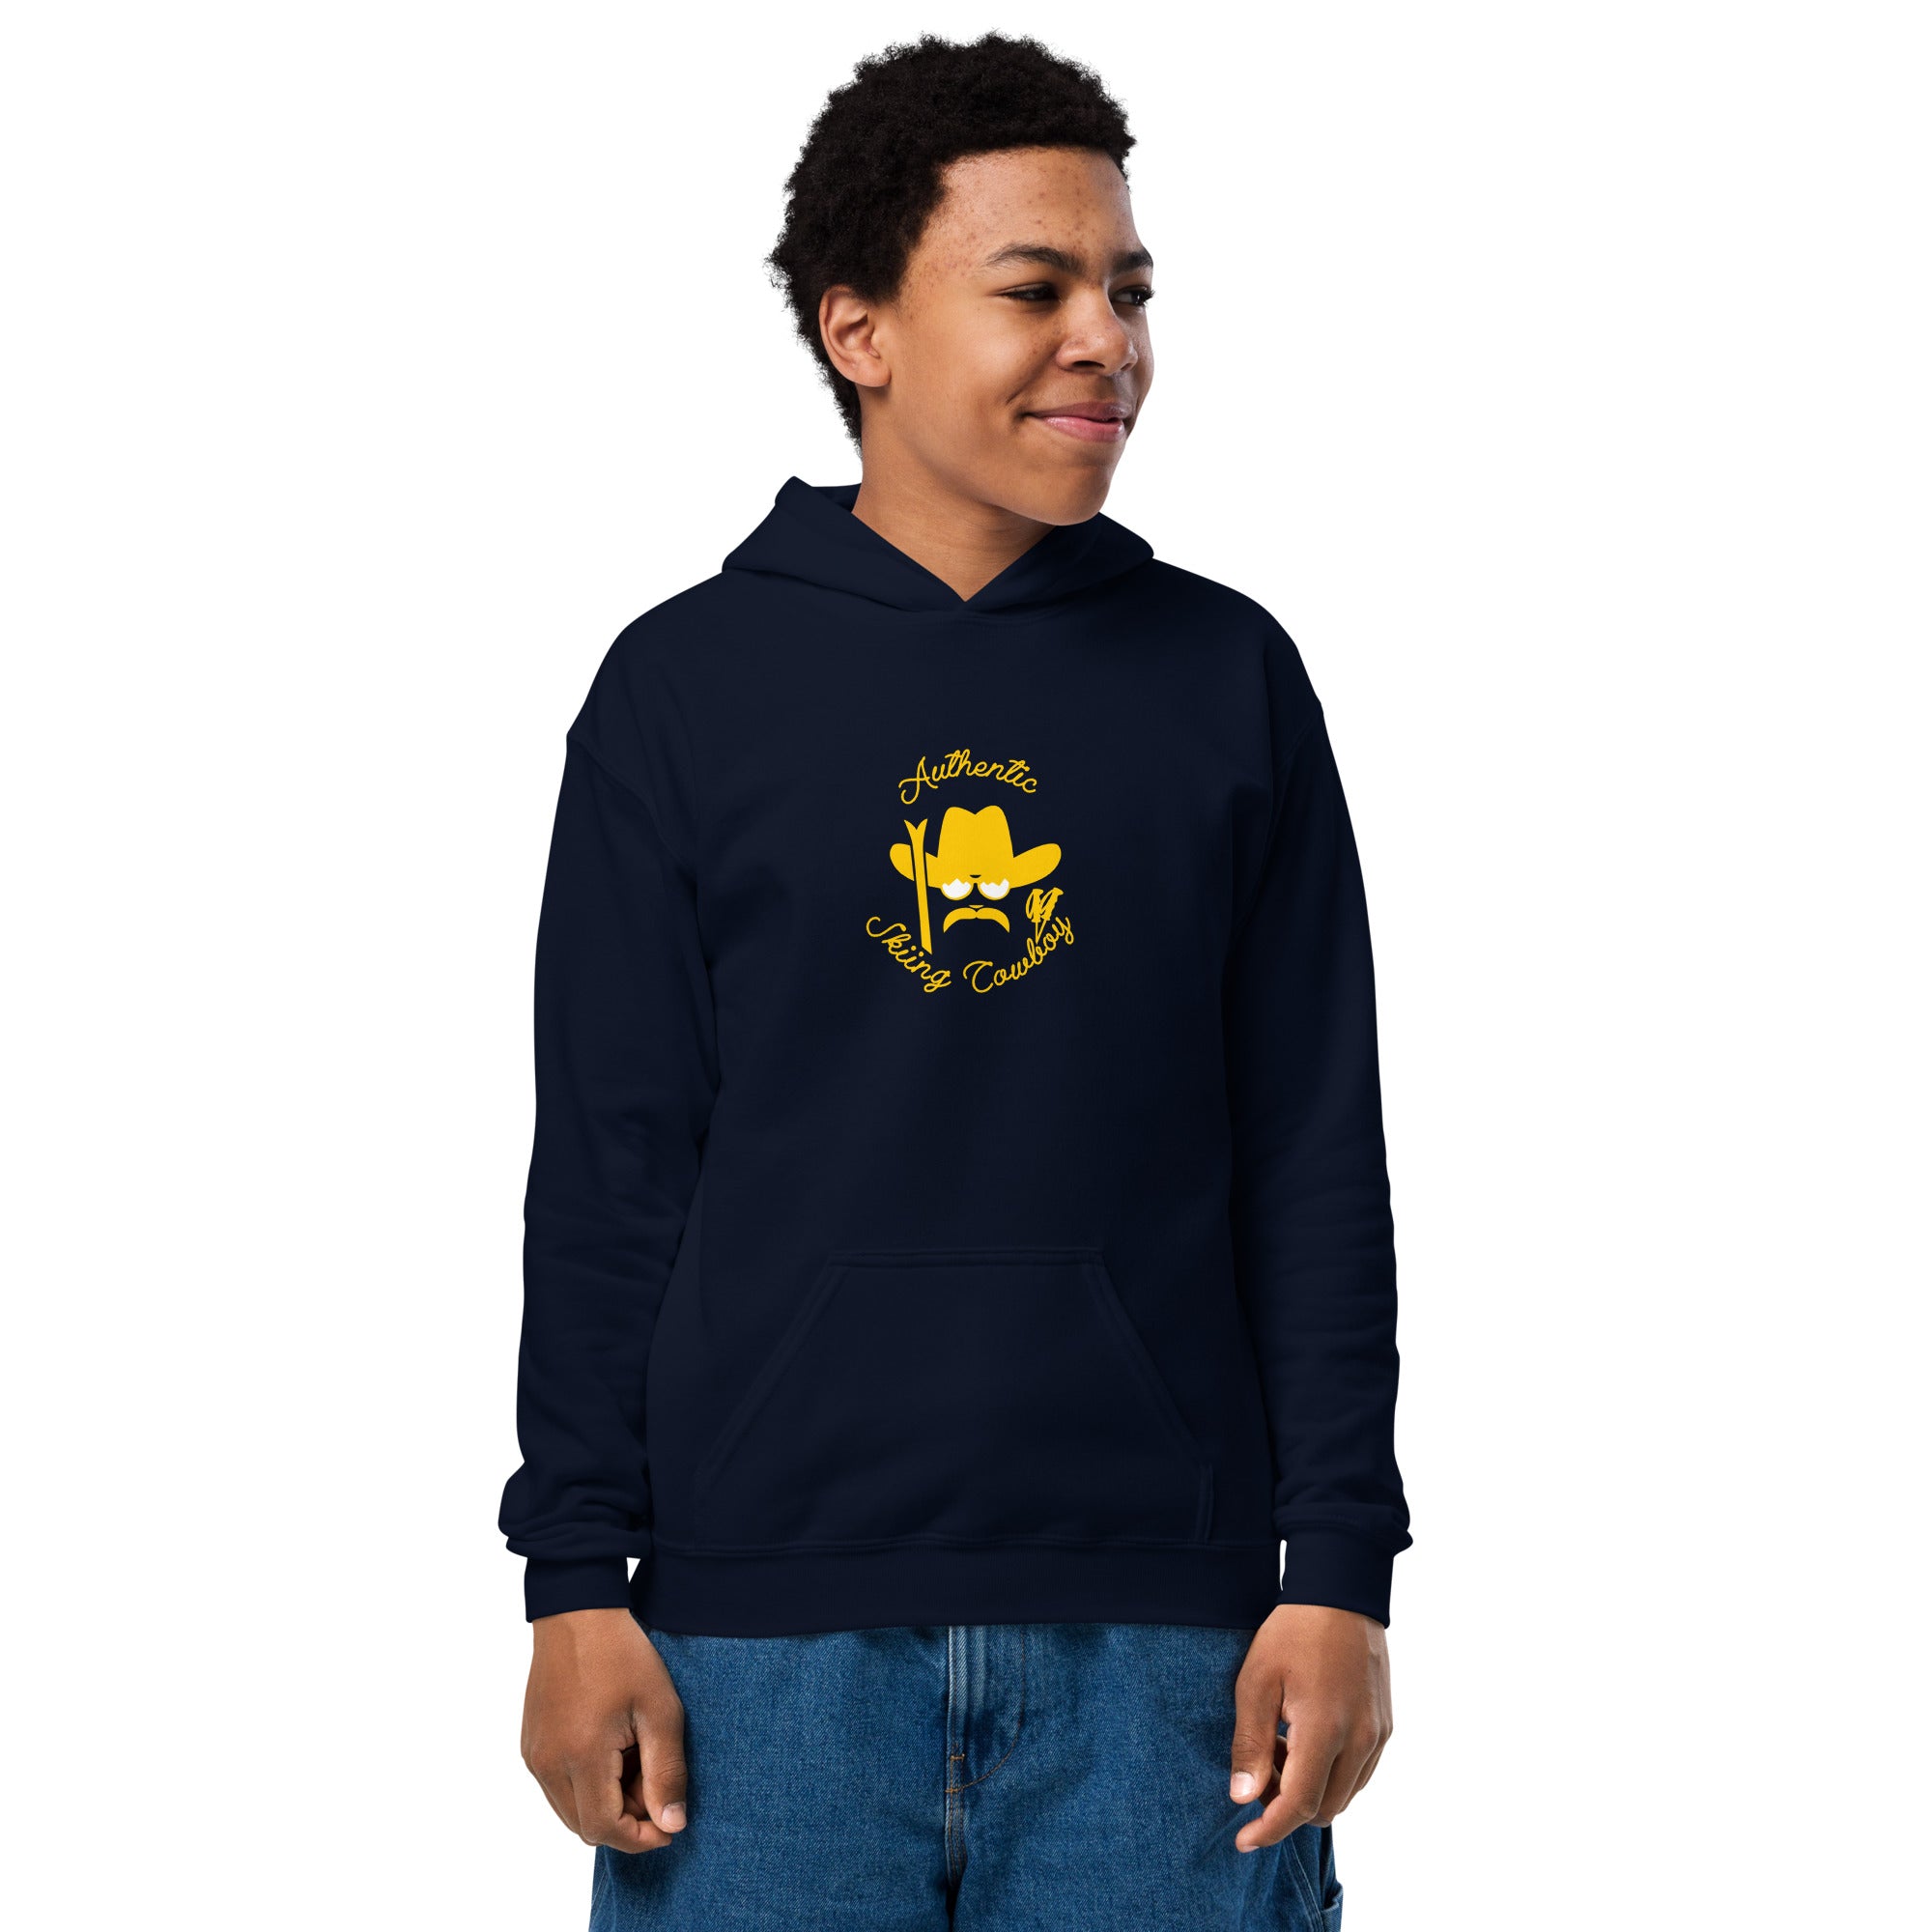 Youth heavy blend hoodie Authentic Skiing Cowboy